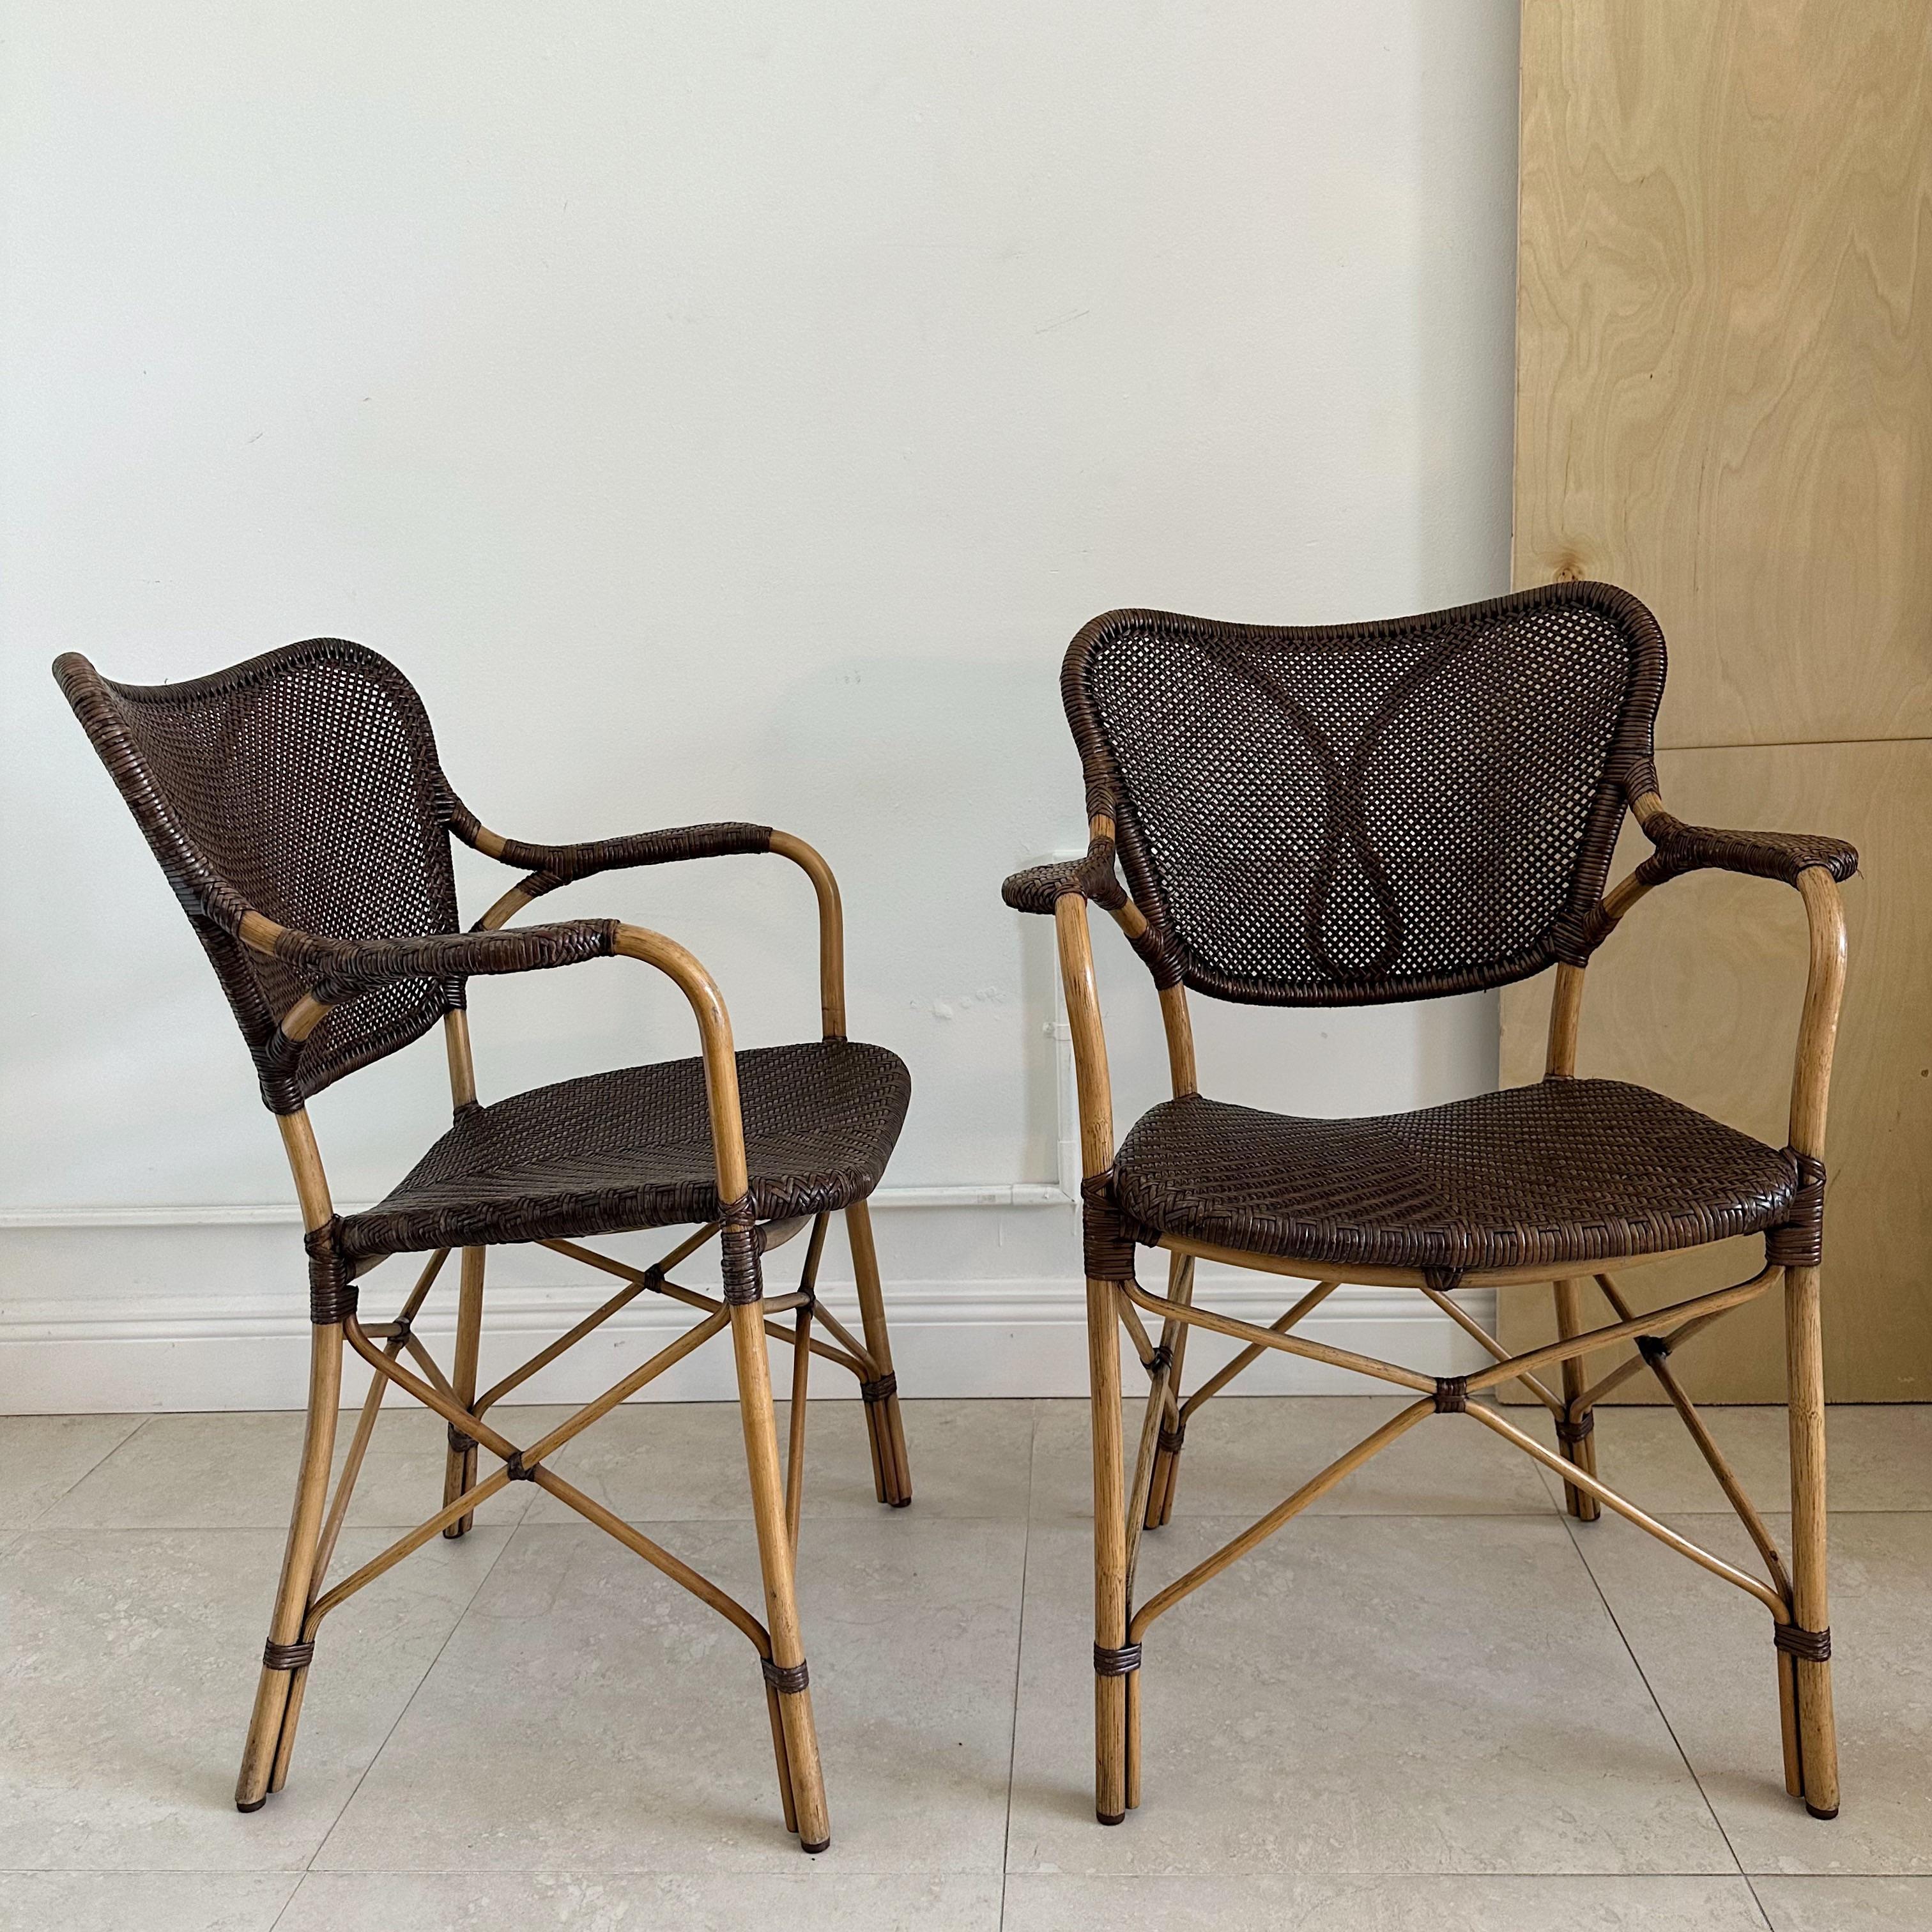 Pair of Yuzuru Yamakawa bamboo and rattan chairs from the 1980's. We have 2 pairs available.

Yuzuru Yamakawa (1933-2012) was a famous Japanese designer known for his great passion for rattan. Yamakawa designed and worked with rattan for more than